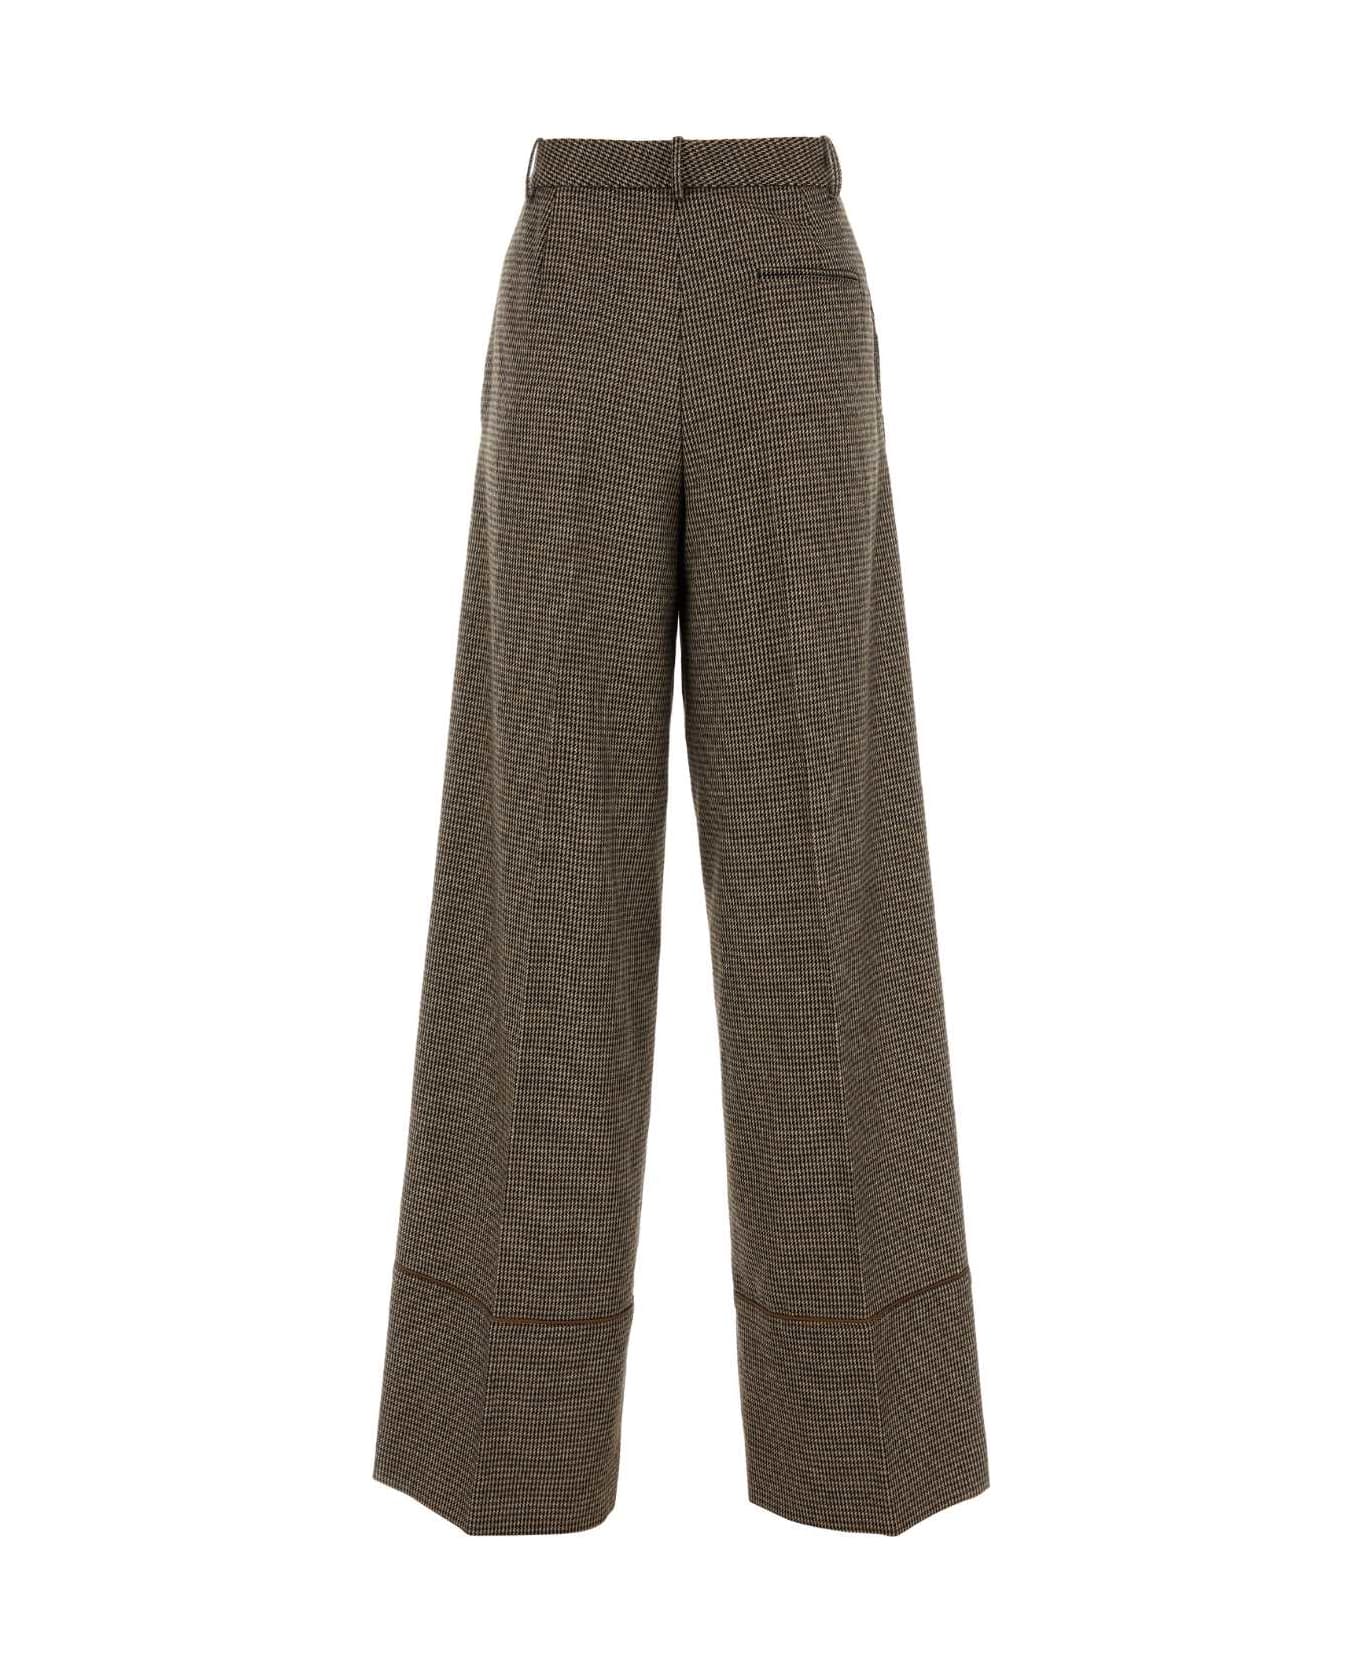 Bally Embroidered Stretch Wool Blend Wide-leg Pant - I8D5